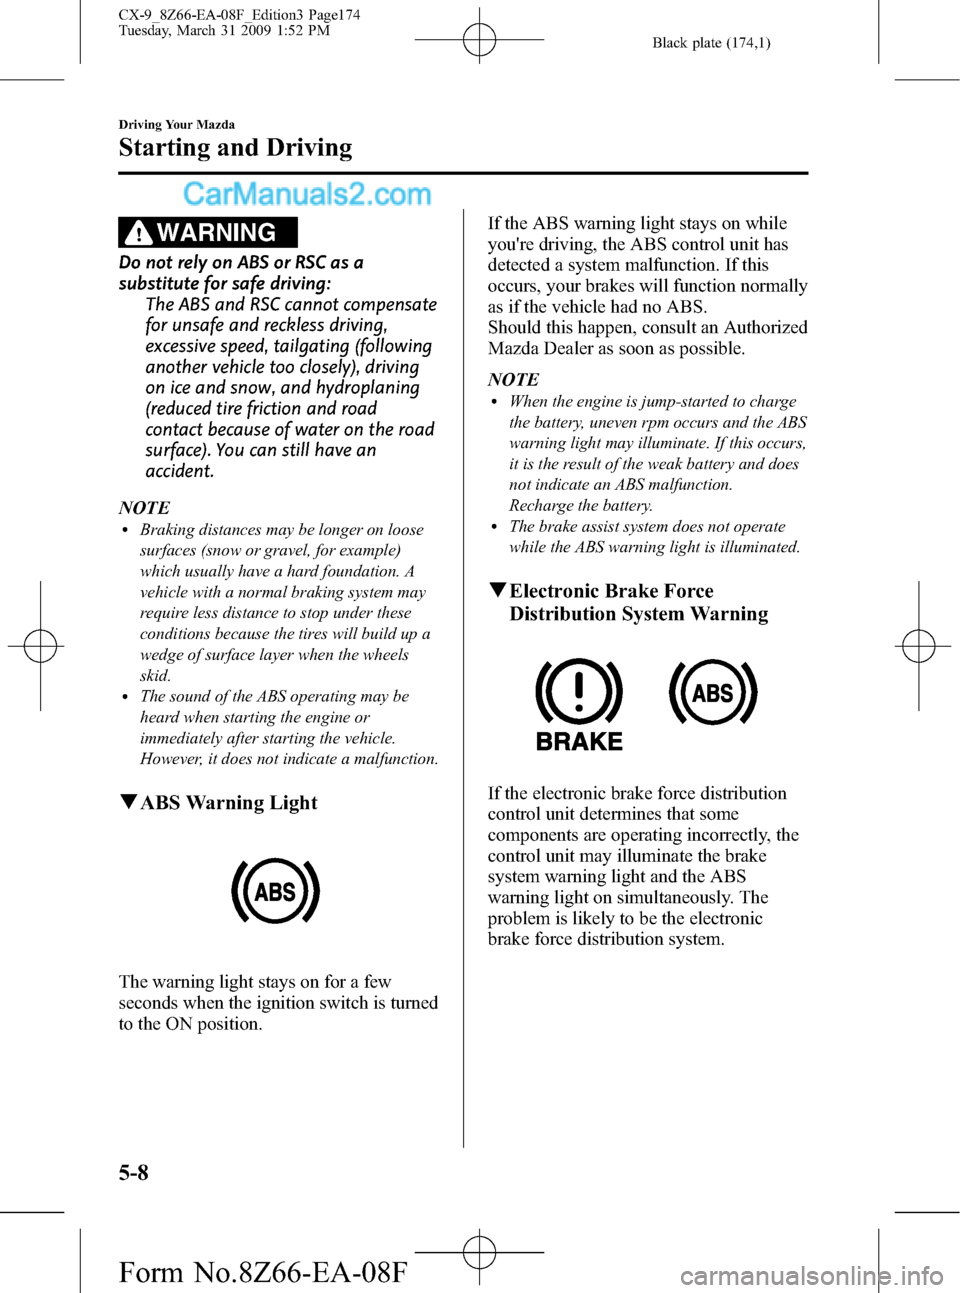 MAZDA MODEL CX-9 2009  Owners Manual (in English) Black plate (174,1)
WARNING
Do not rely on ABS or RSC as a
substitute for safe driving:
The ABS and RSC cannot compensate
for unsafe and reckless driving,
excessive speed, tailgating (following
anothe